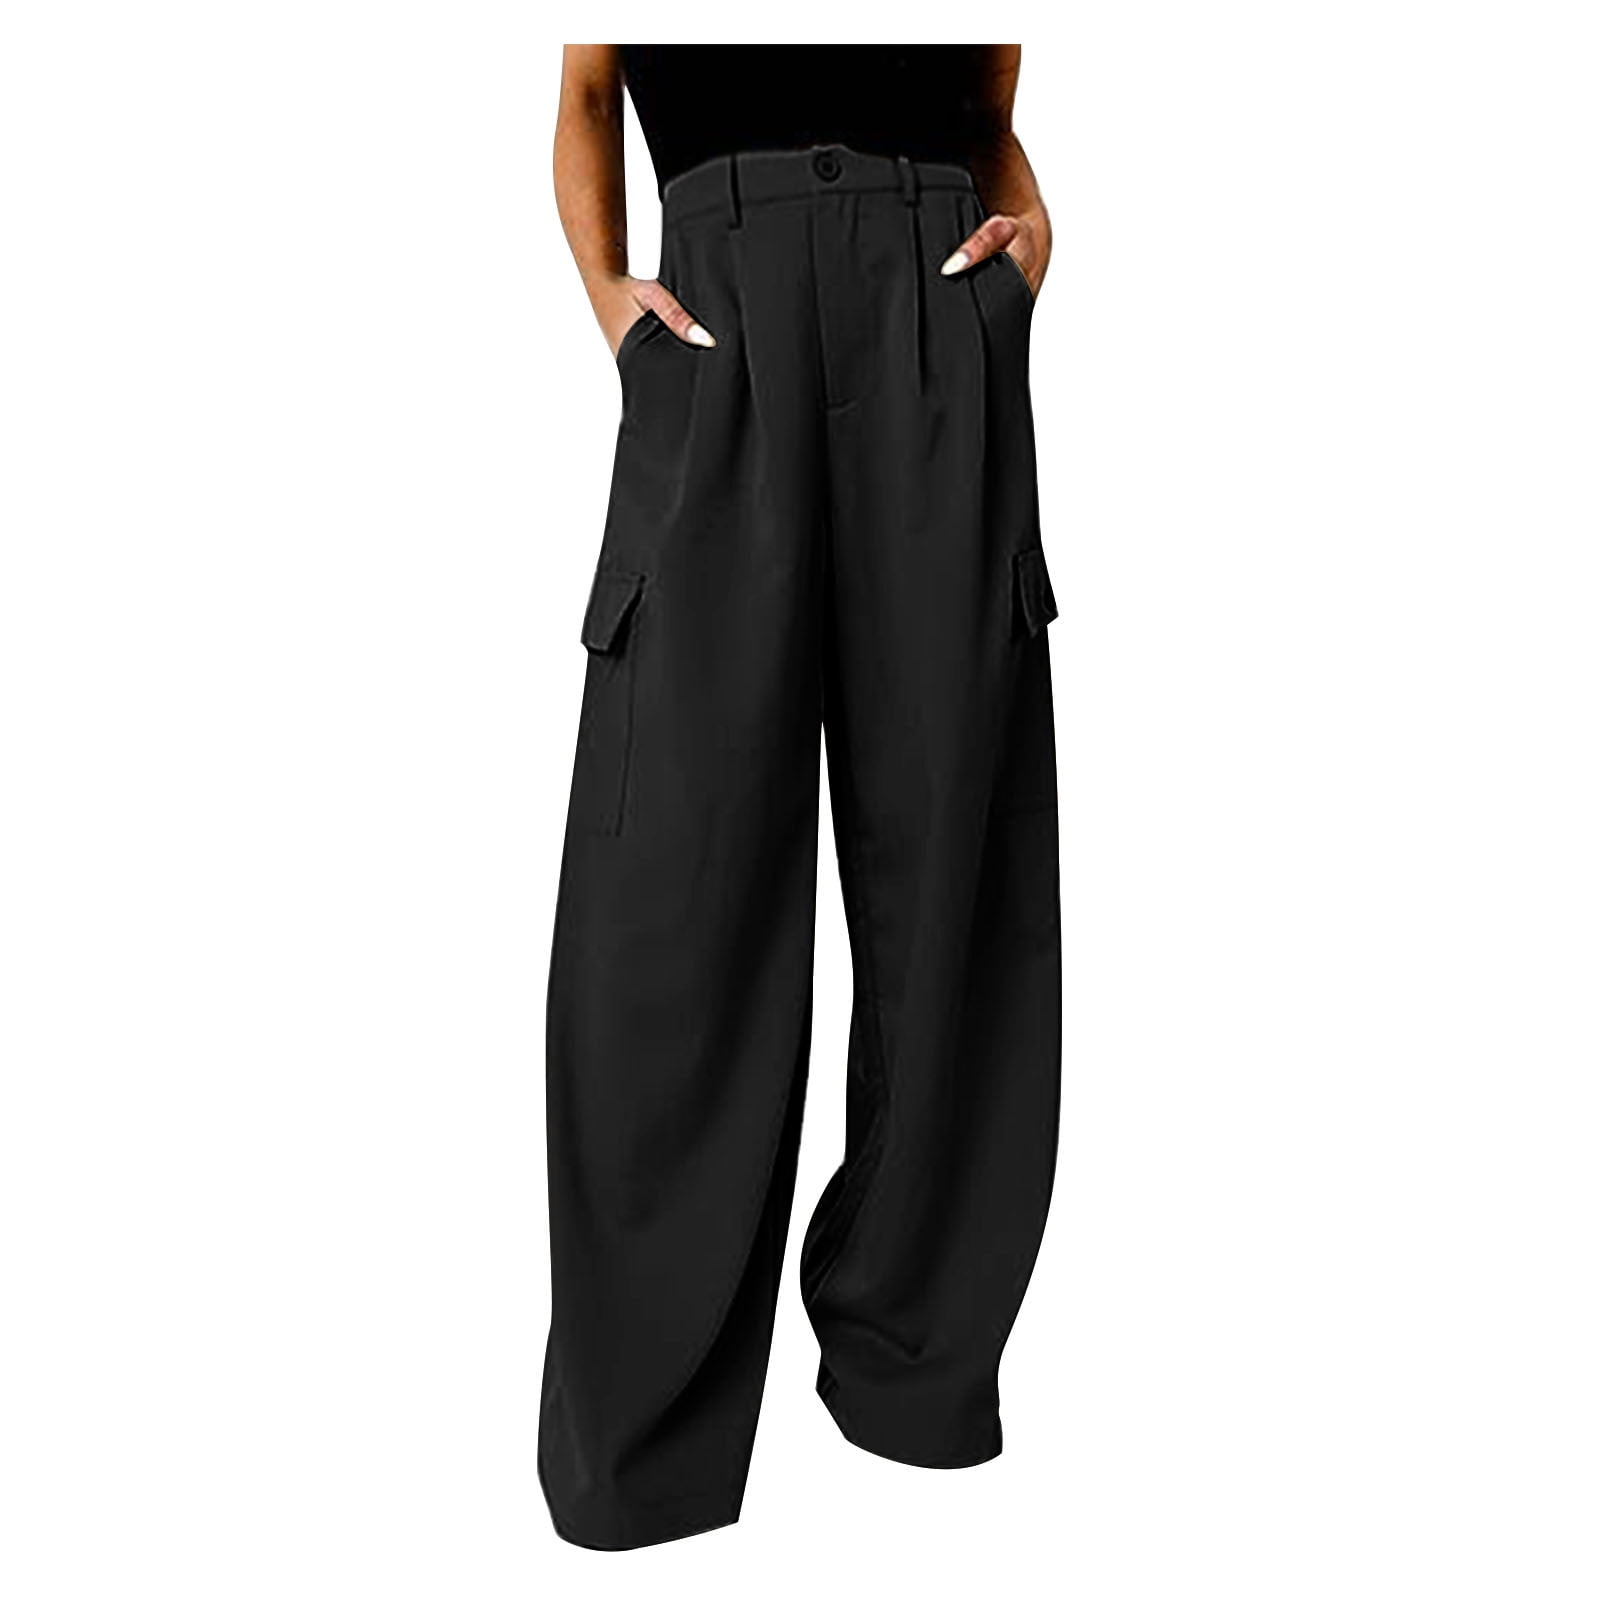 JWZUY Womens High Waisted Wide Leg Cargo Pants Baggy Casual Slack Suit ...